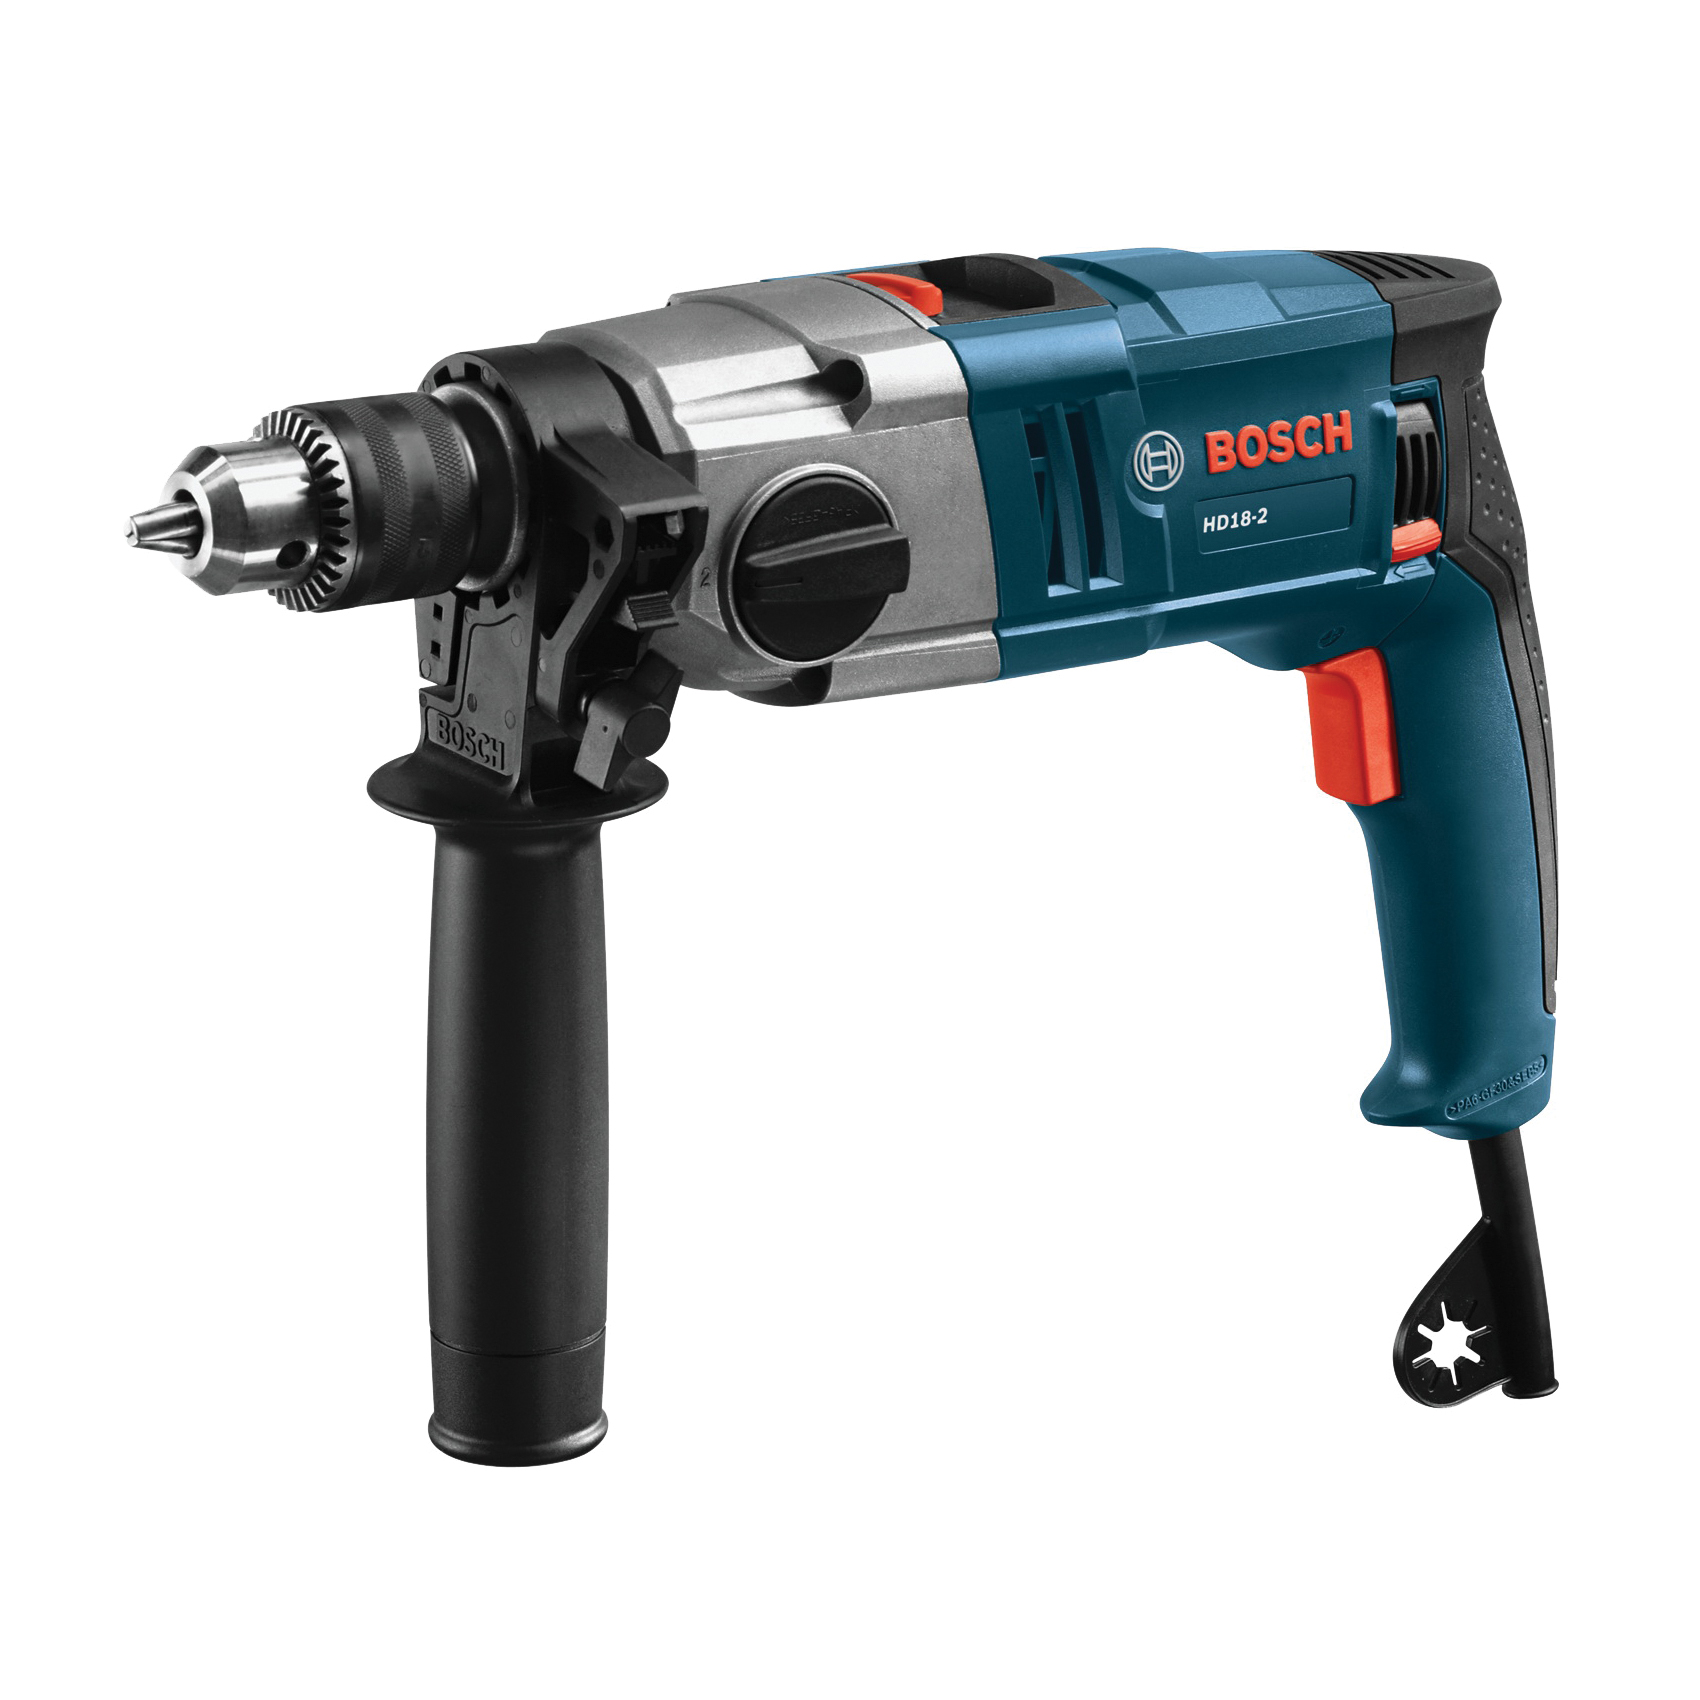 HD18-2 Hammer Drill, 8.5 A, Keyed Chuck, 1/2 in Chuck, 0 to 3200 rpm Speed